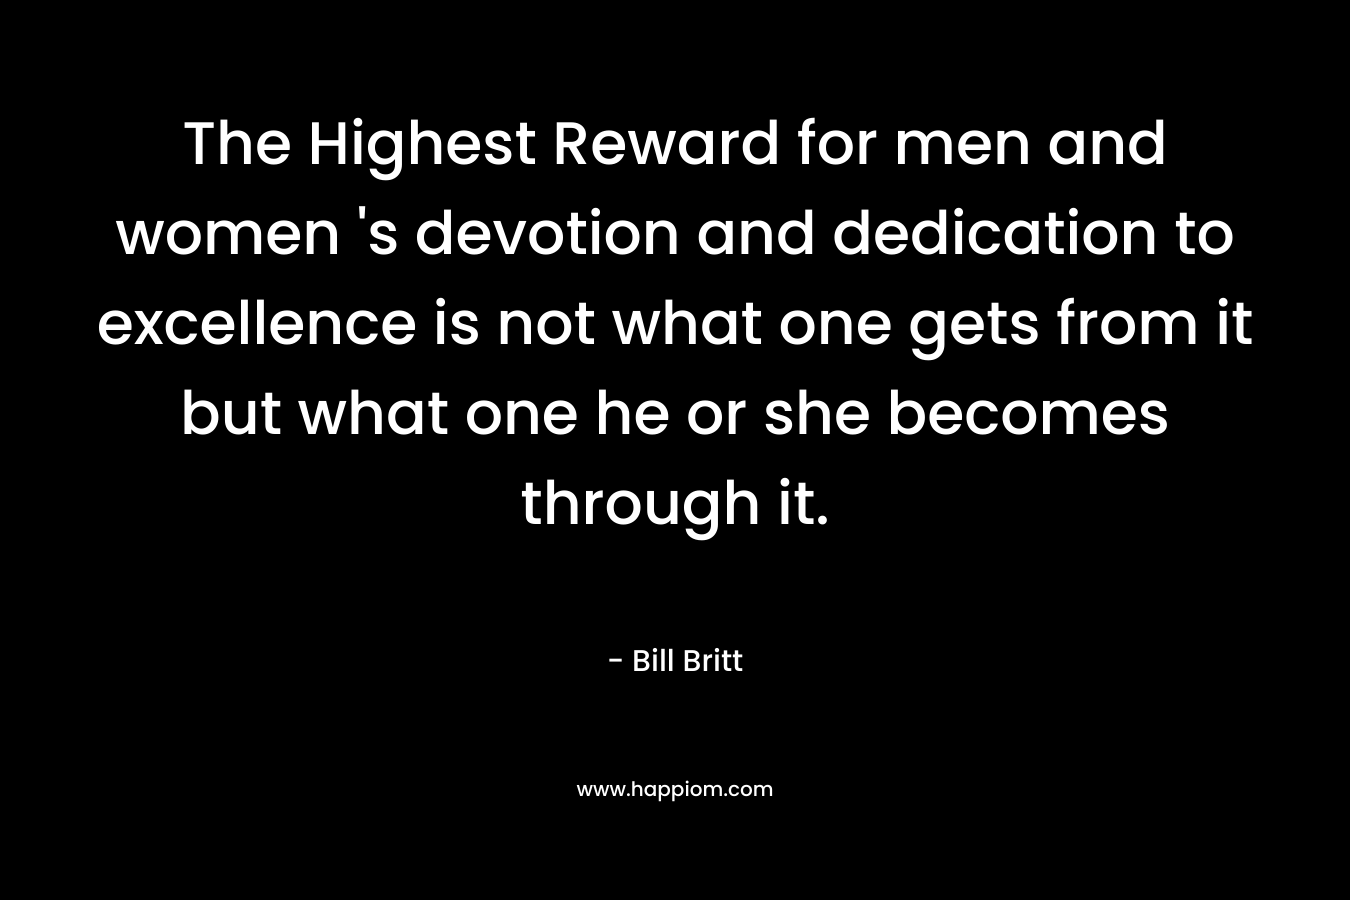 The Highest Reward for men and women 's devotion and dedication to excellence is not what one gets from it but what one he or she becomes through it.